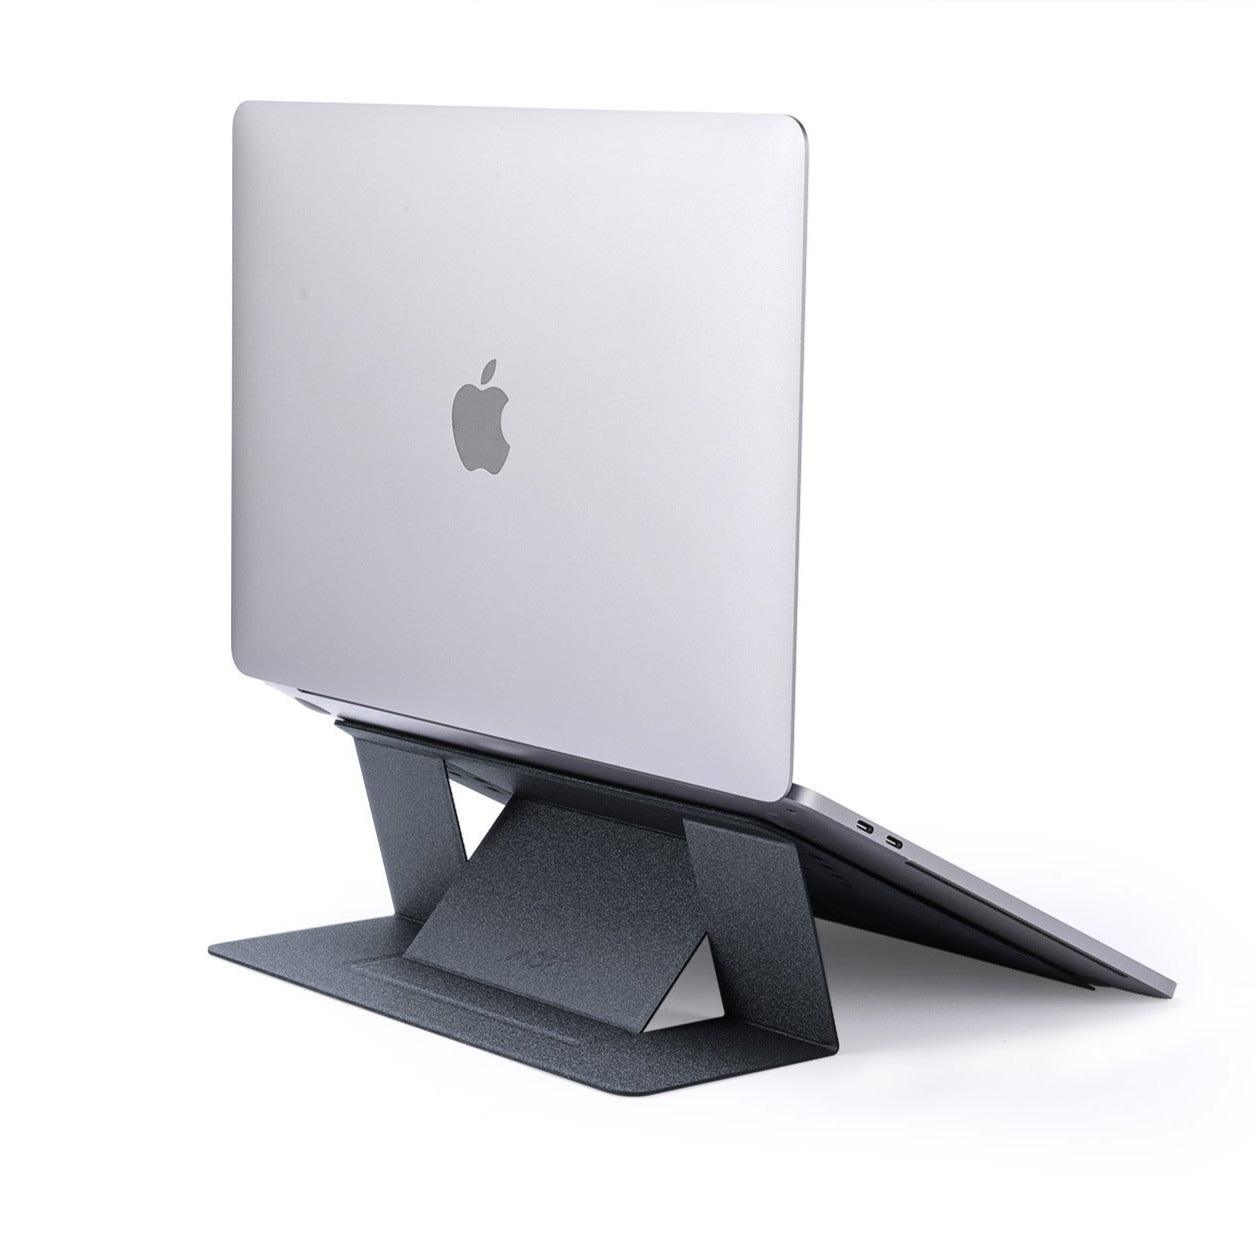 MOFT Air-Flow Non-Adhesive Universal Laptop Stand Fits 11 to 17 Inches Laptop with Vent Holes